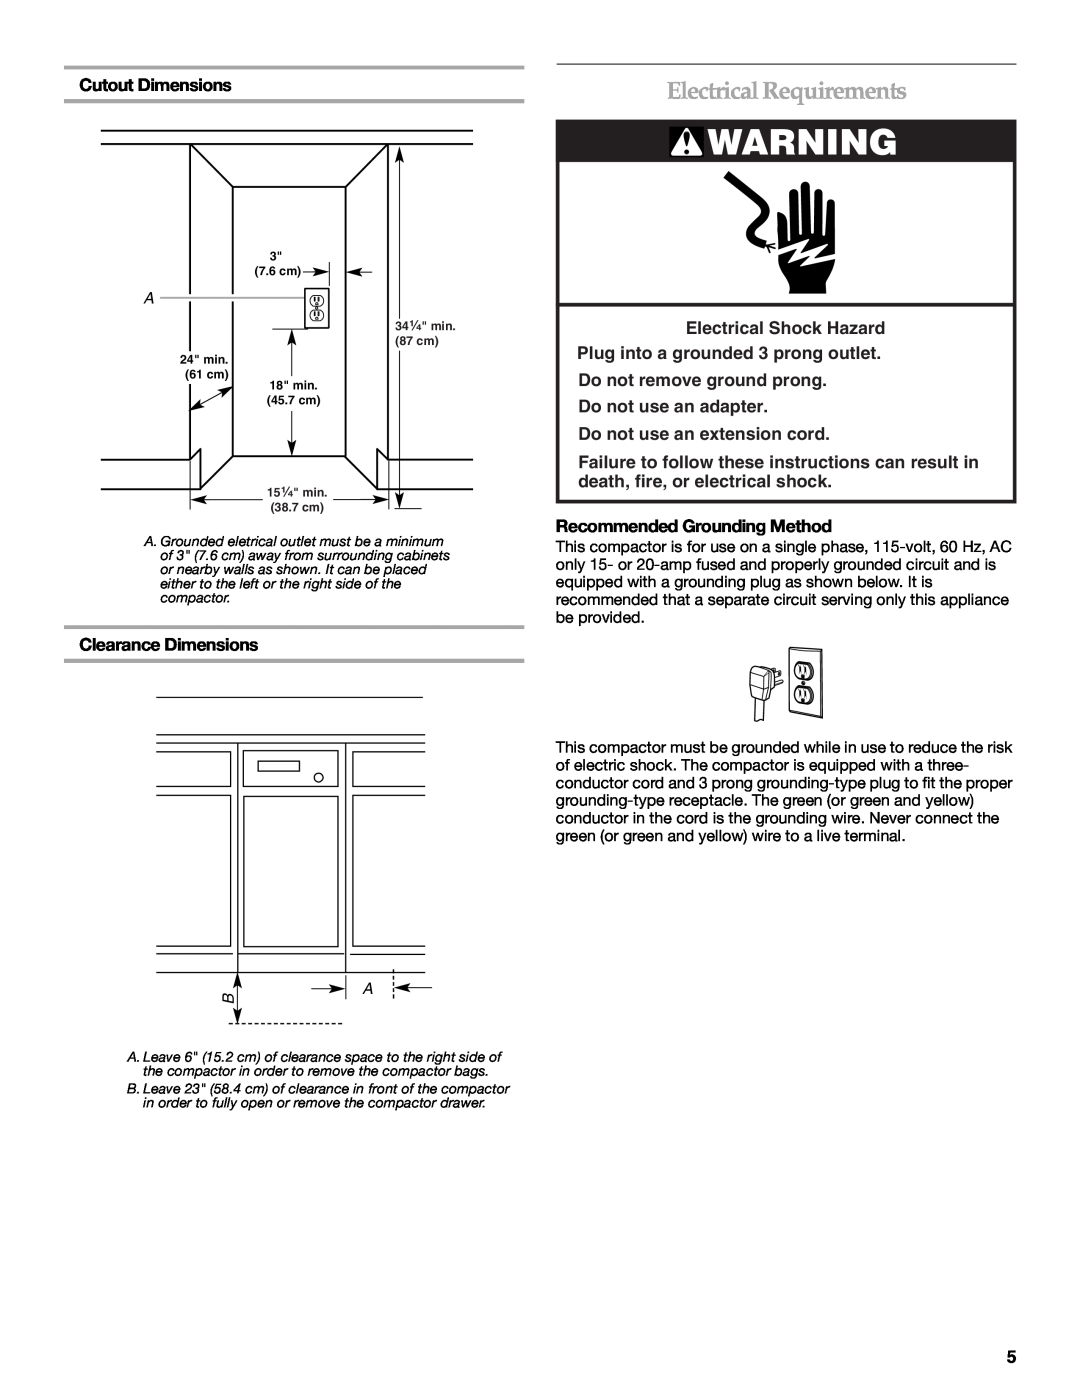 KitchenAid 9871780B manual Electrical Requirements, Cutout Dimensions, Clearance Dimensions, Do not use an extension cord 